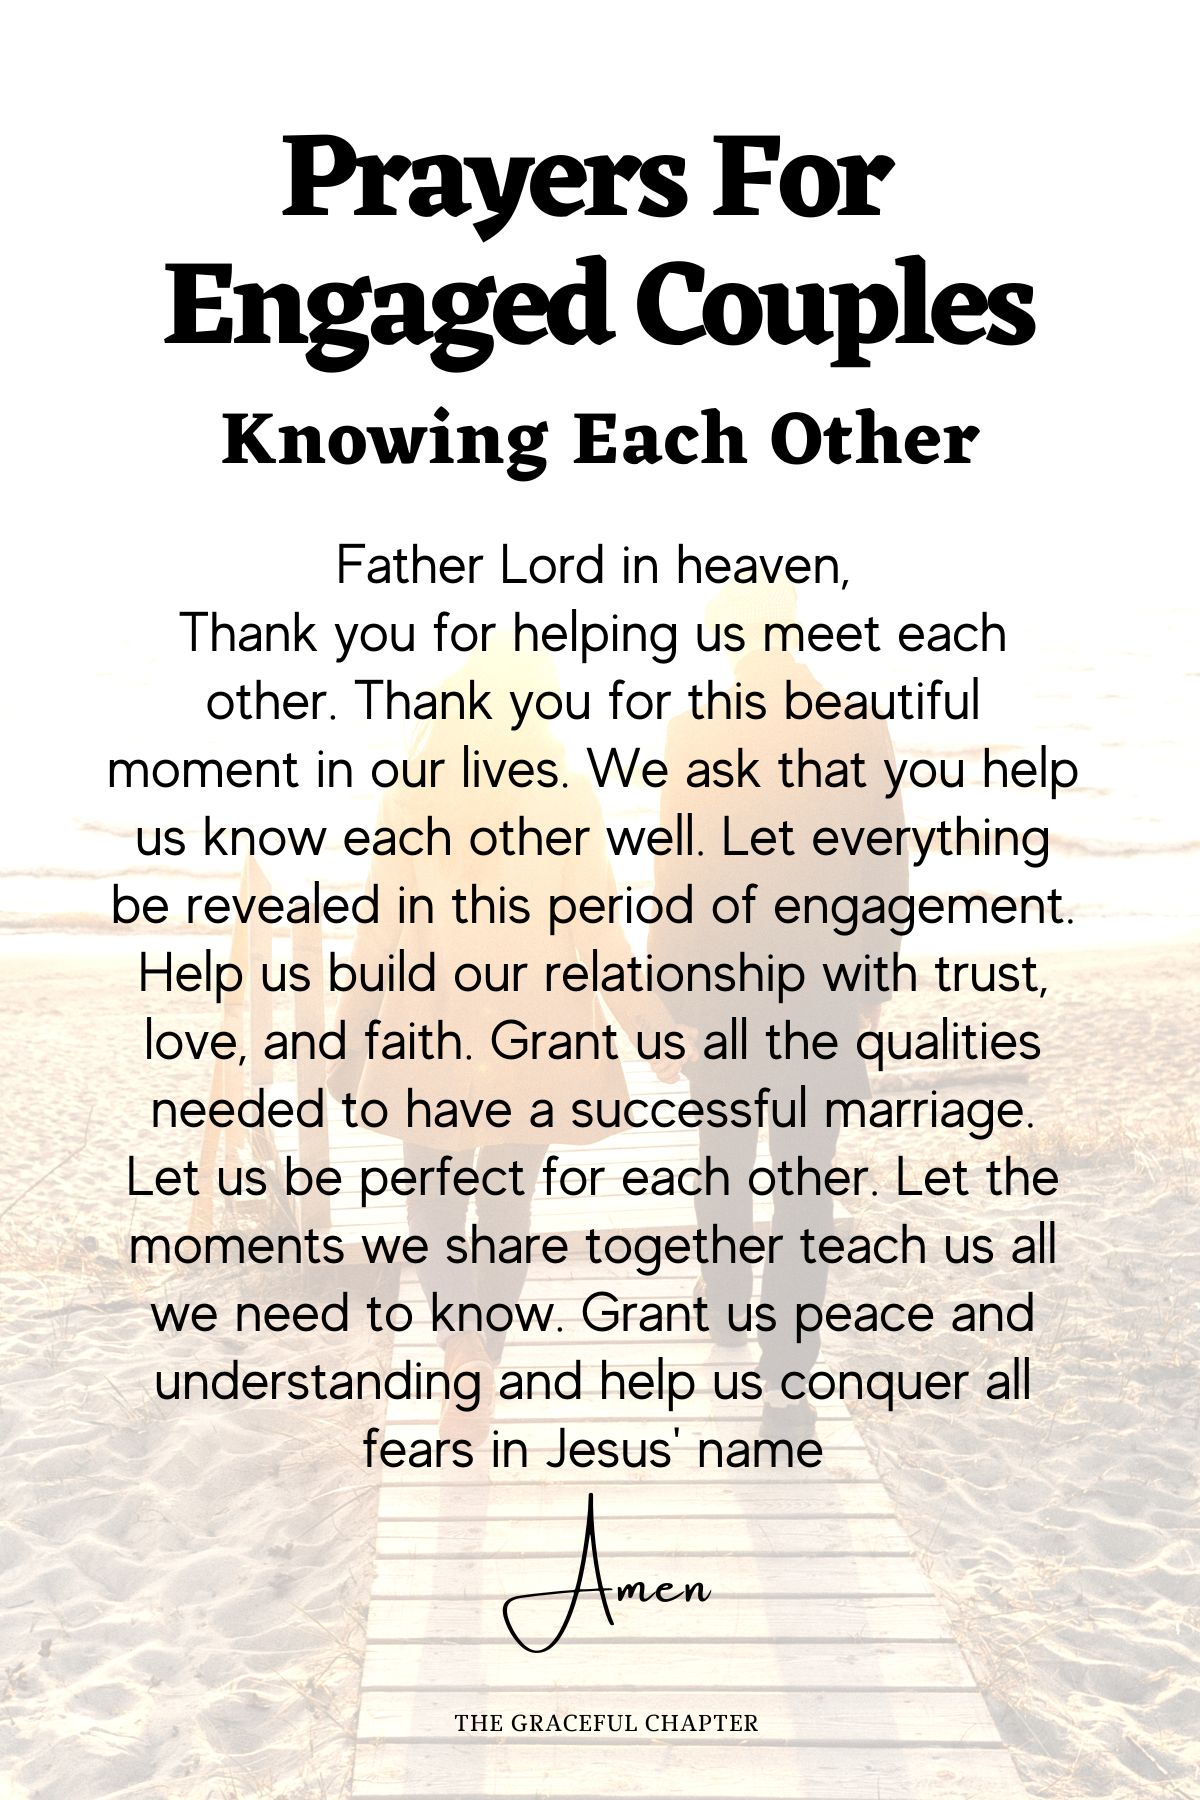  prayers for engaged couples 
Knowing each other